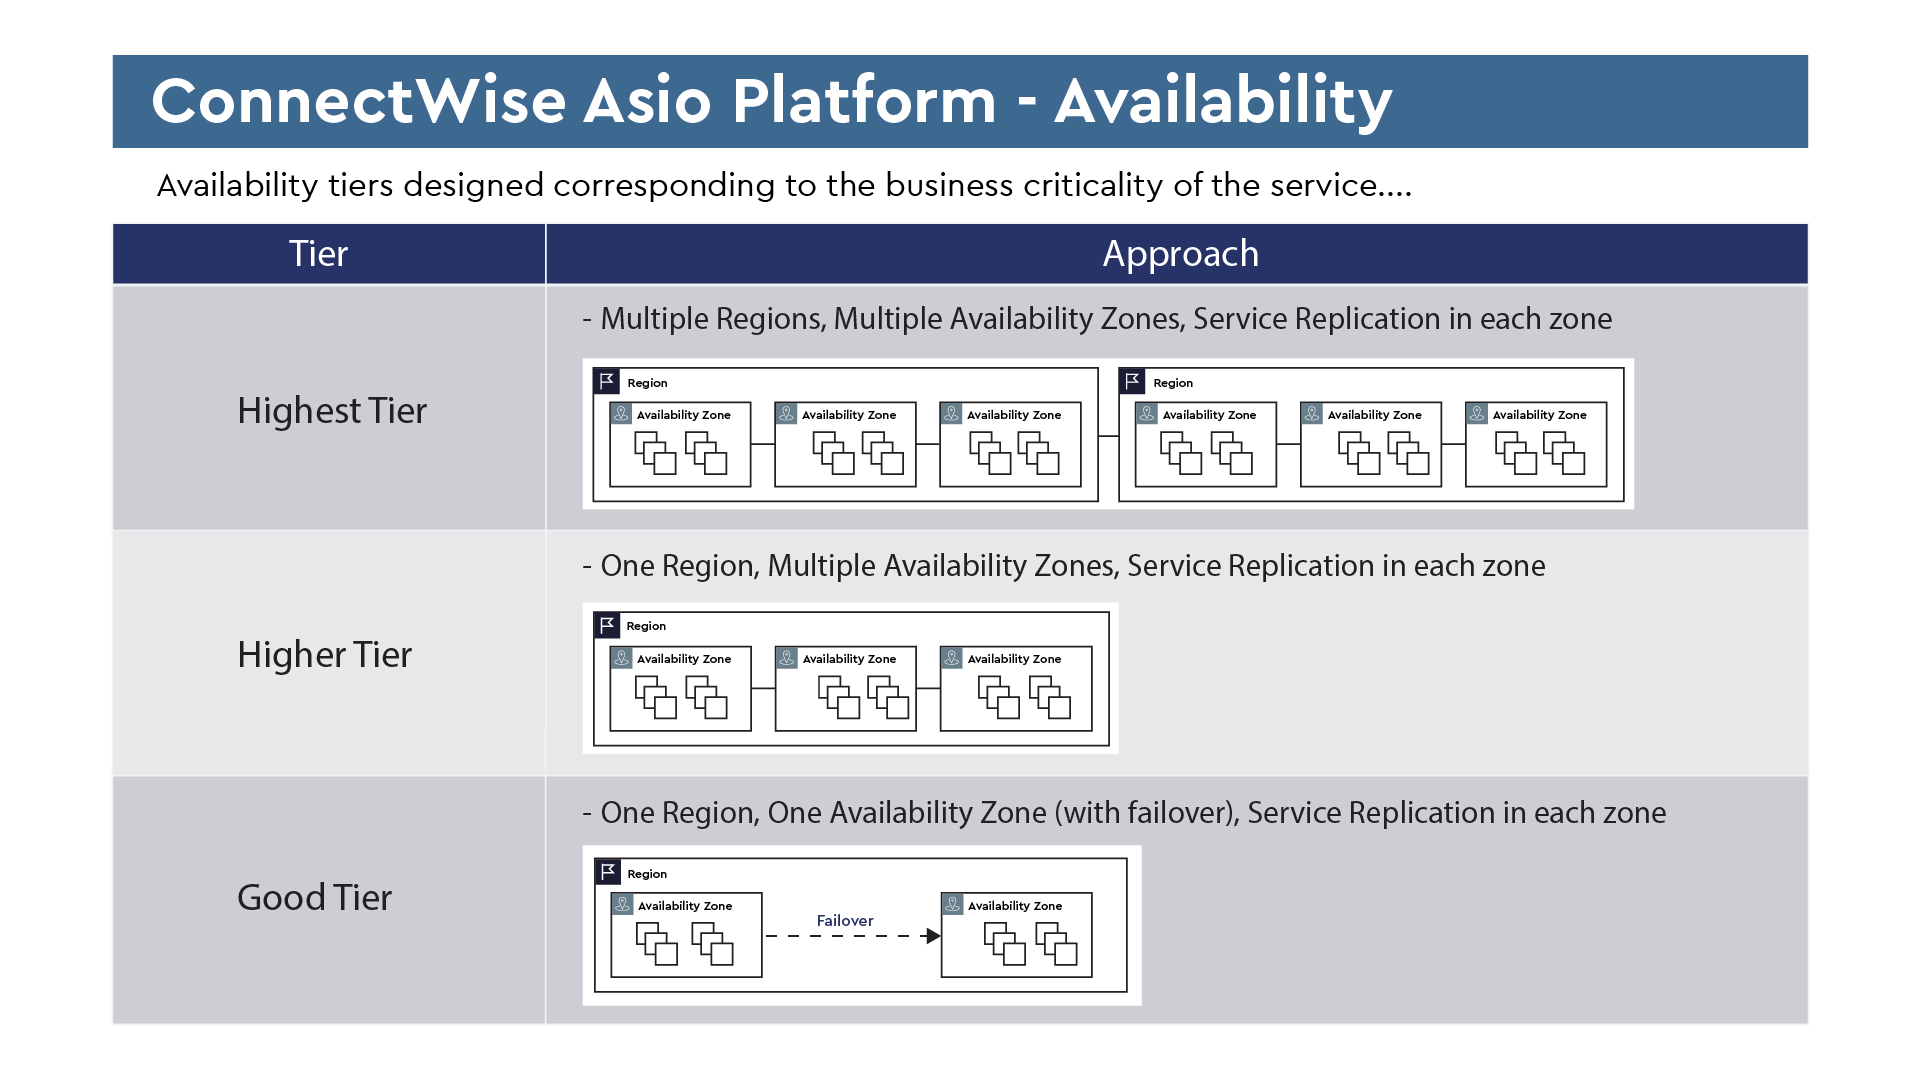 23-CPMK-1300-Blog-Asio Platform-Availability-Table-01.png